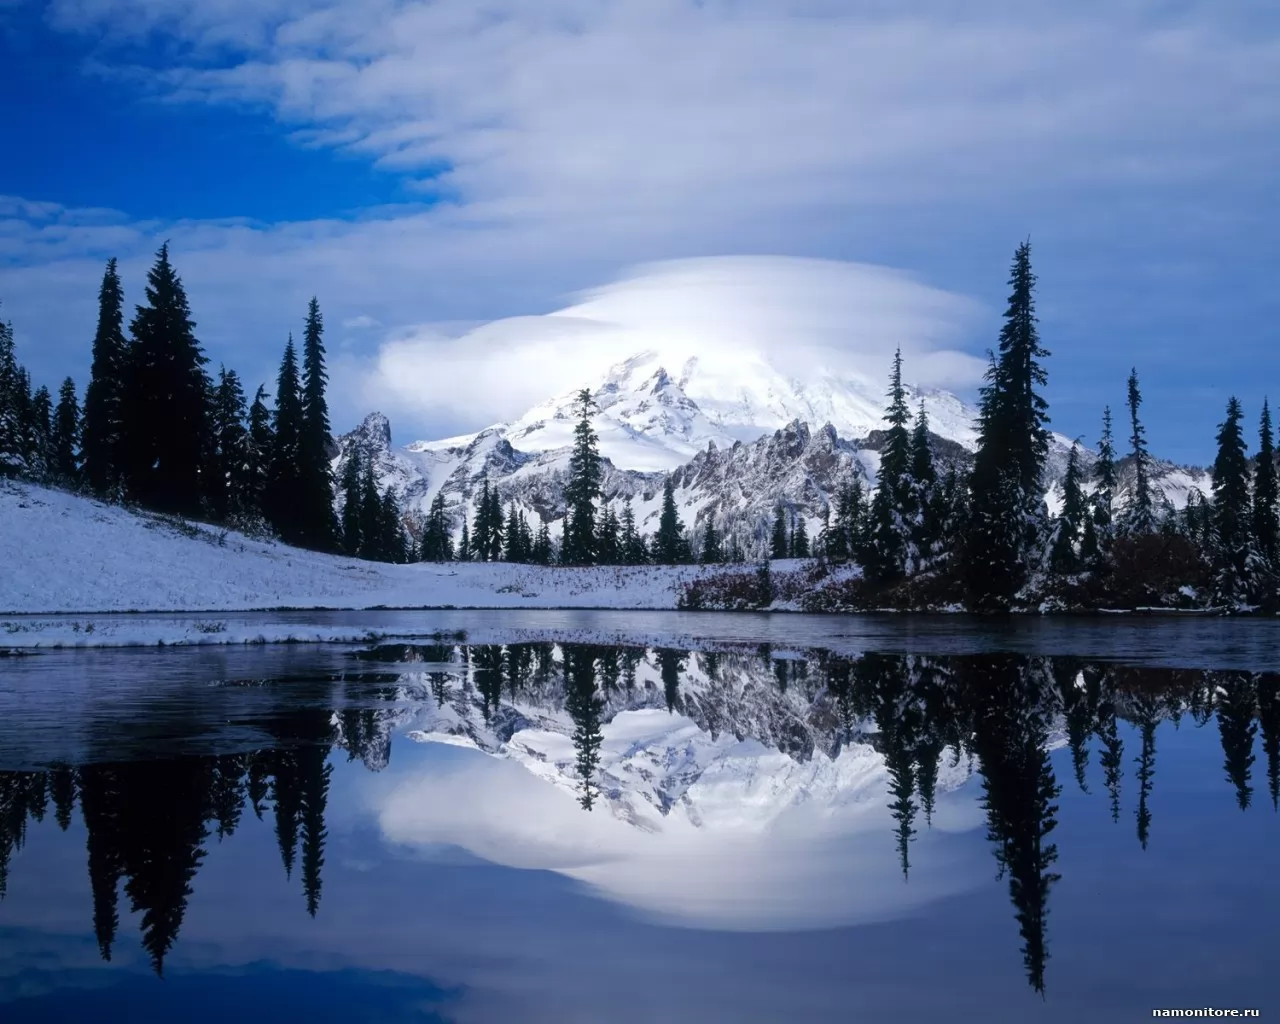 Mountain in a cap of snow and clouds, dark blue, forest, lake, mountains, nature, winter x